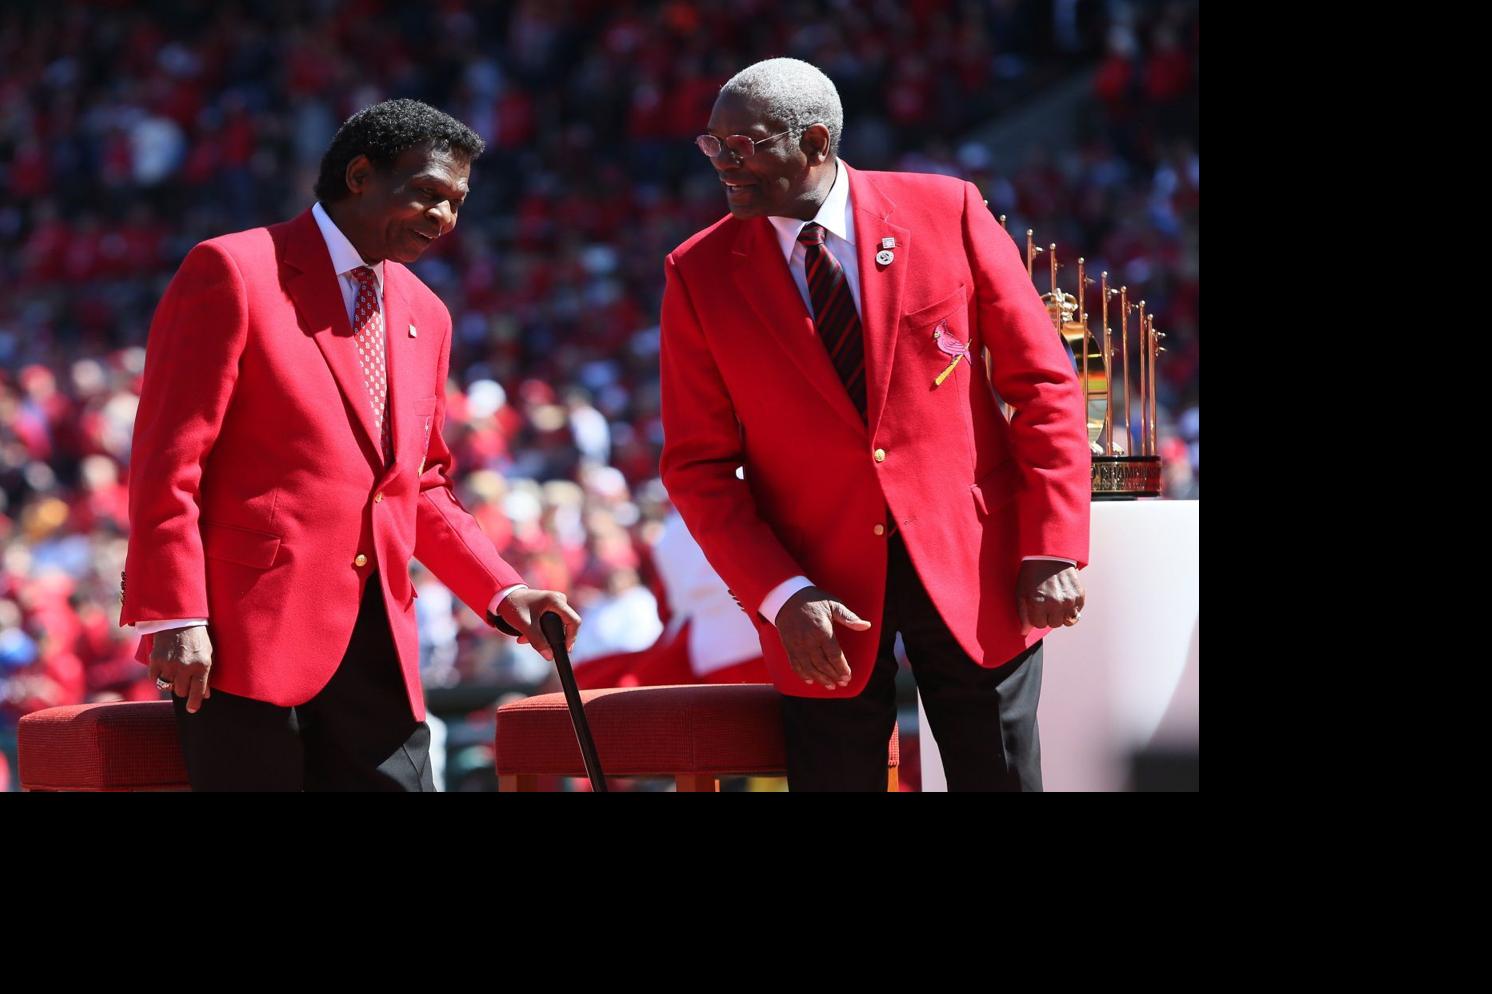 Lou Brock undergoing treatment for cancer